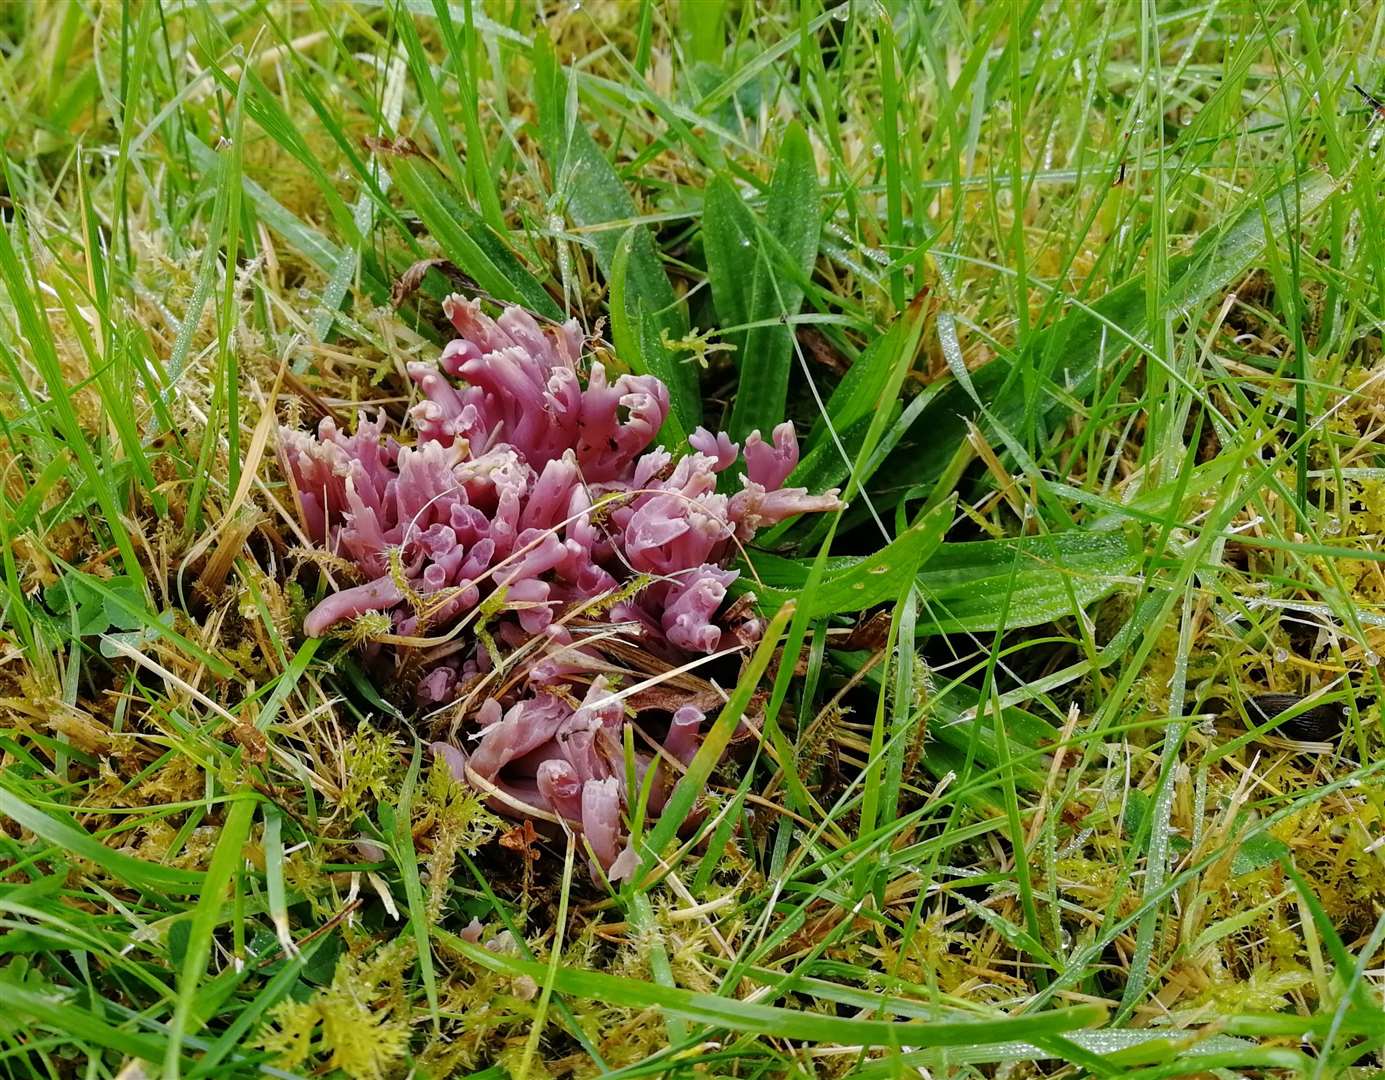 The colourful Violet Coral fungus was found on grasslands at two Munros (Plantlife/PA)